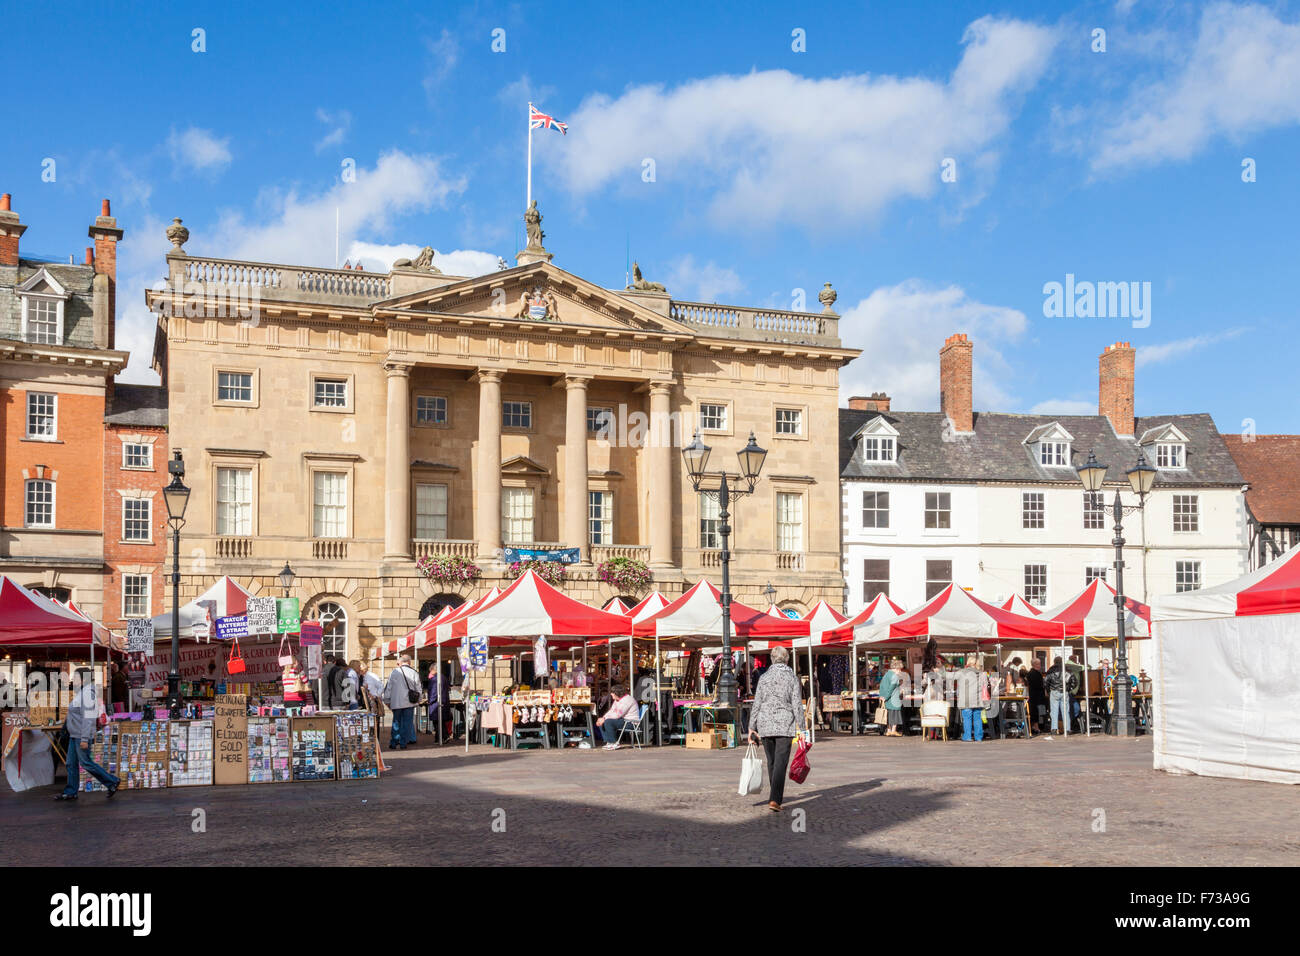 The Buttermarket with market stalls in front of it, in the market town of Newark on Trent, Nottinghamshire, England, UK Stock Photo